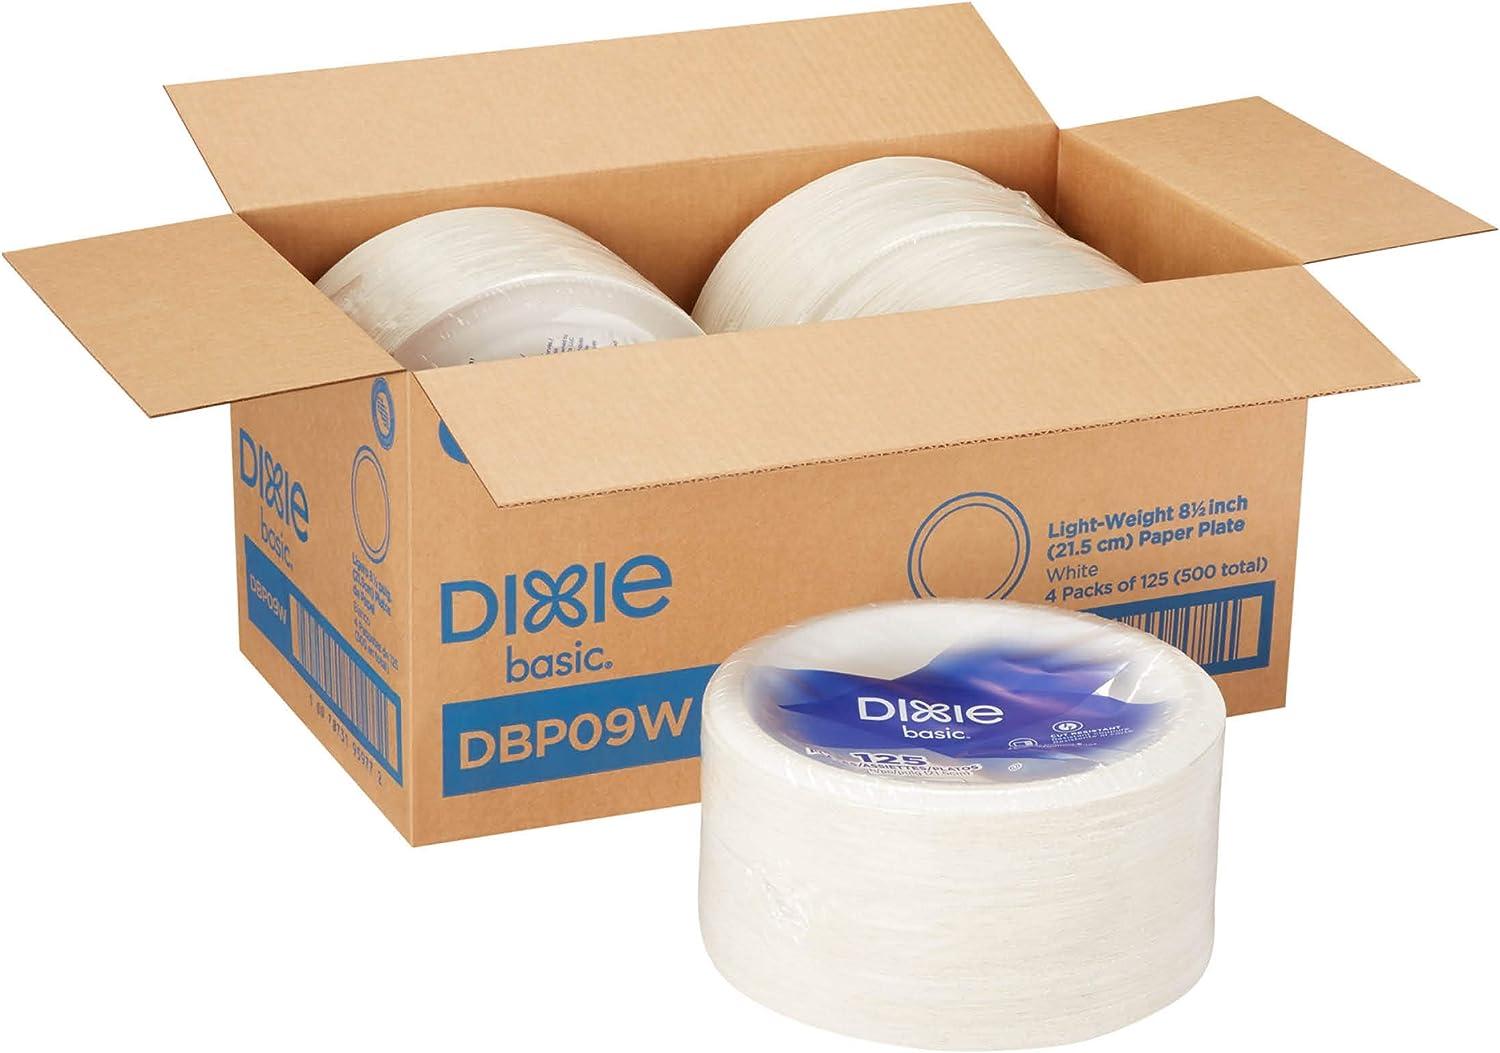 Dixie Basic 8.5in Light-Weight Paper Plates 500 Pack for $21.17